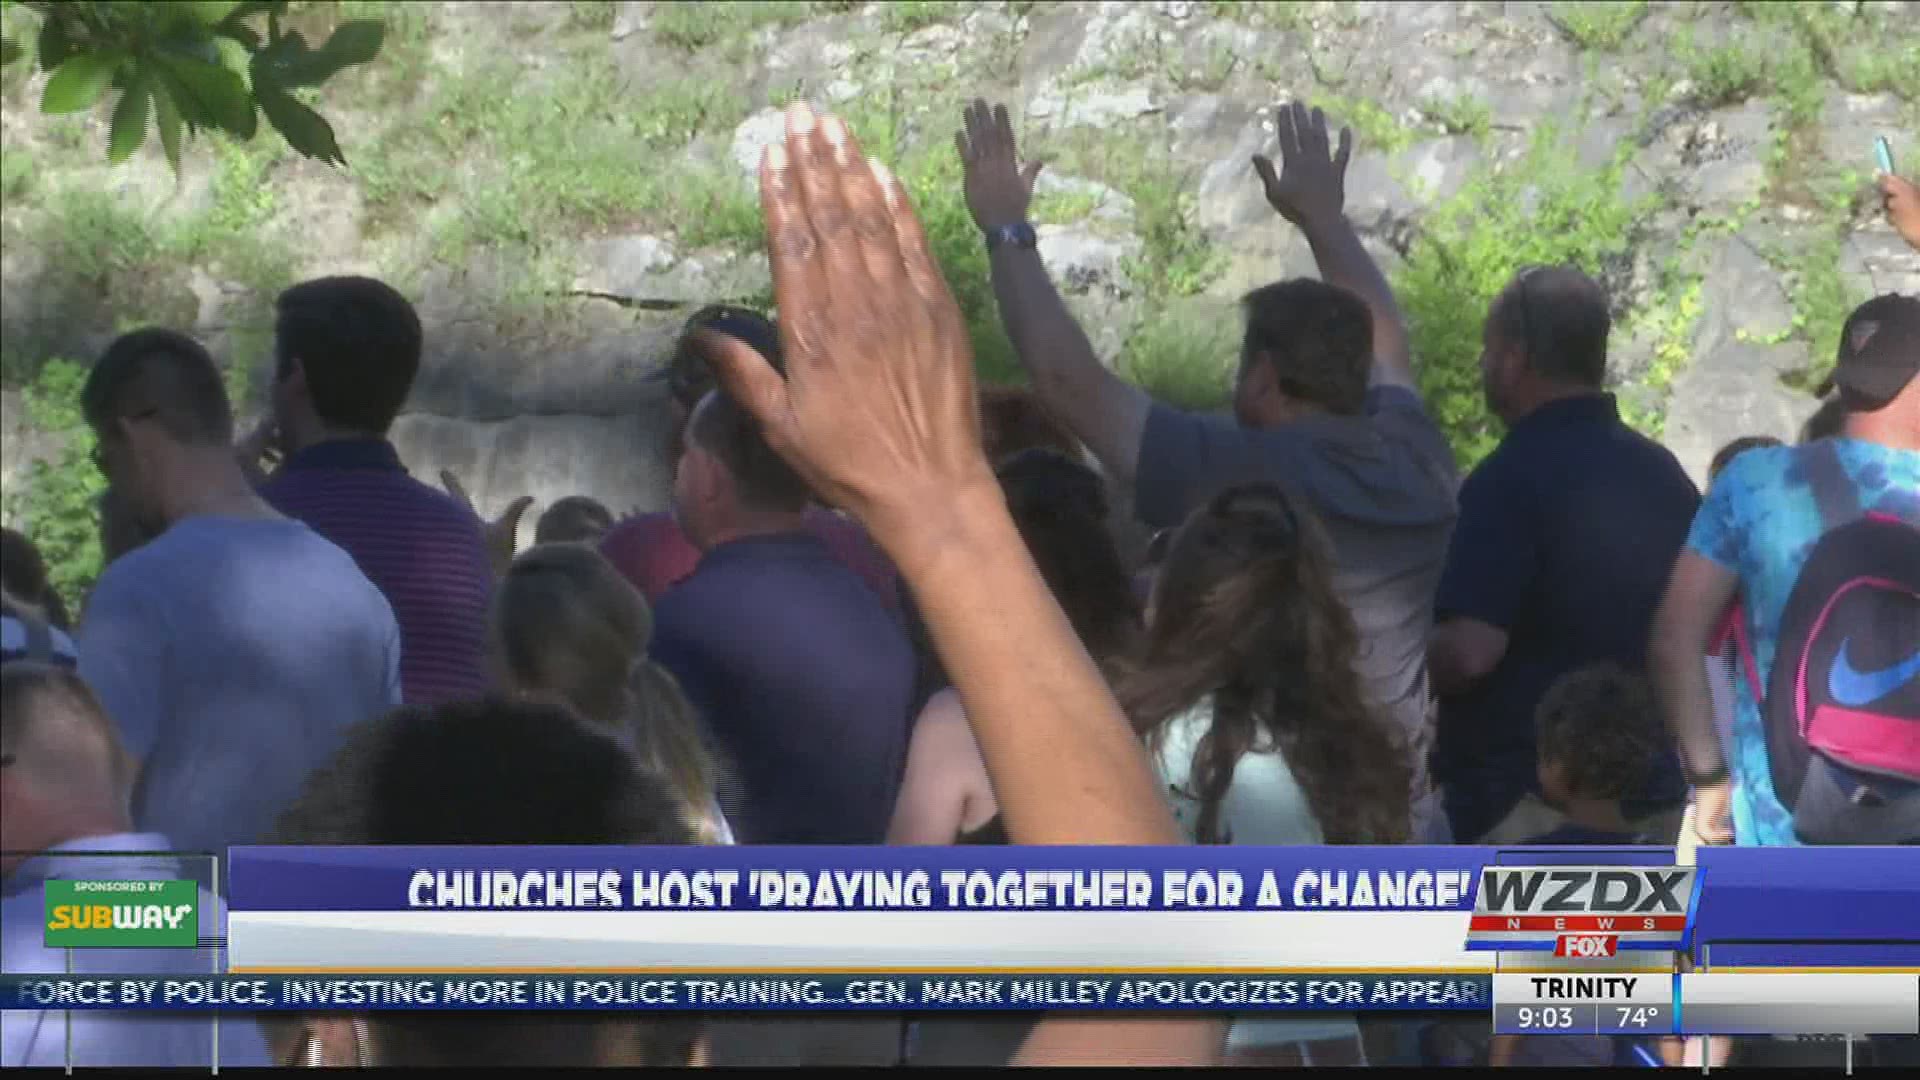 Several local churches gathered at Big Spring Park East to pray for the community.